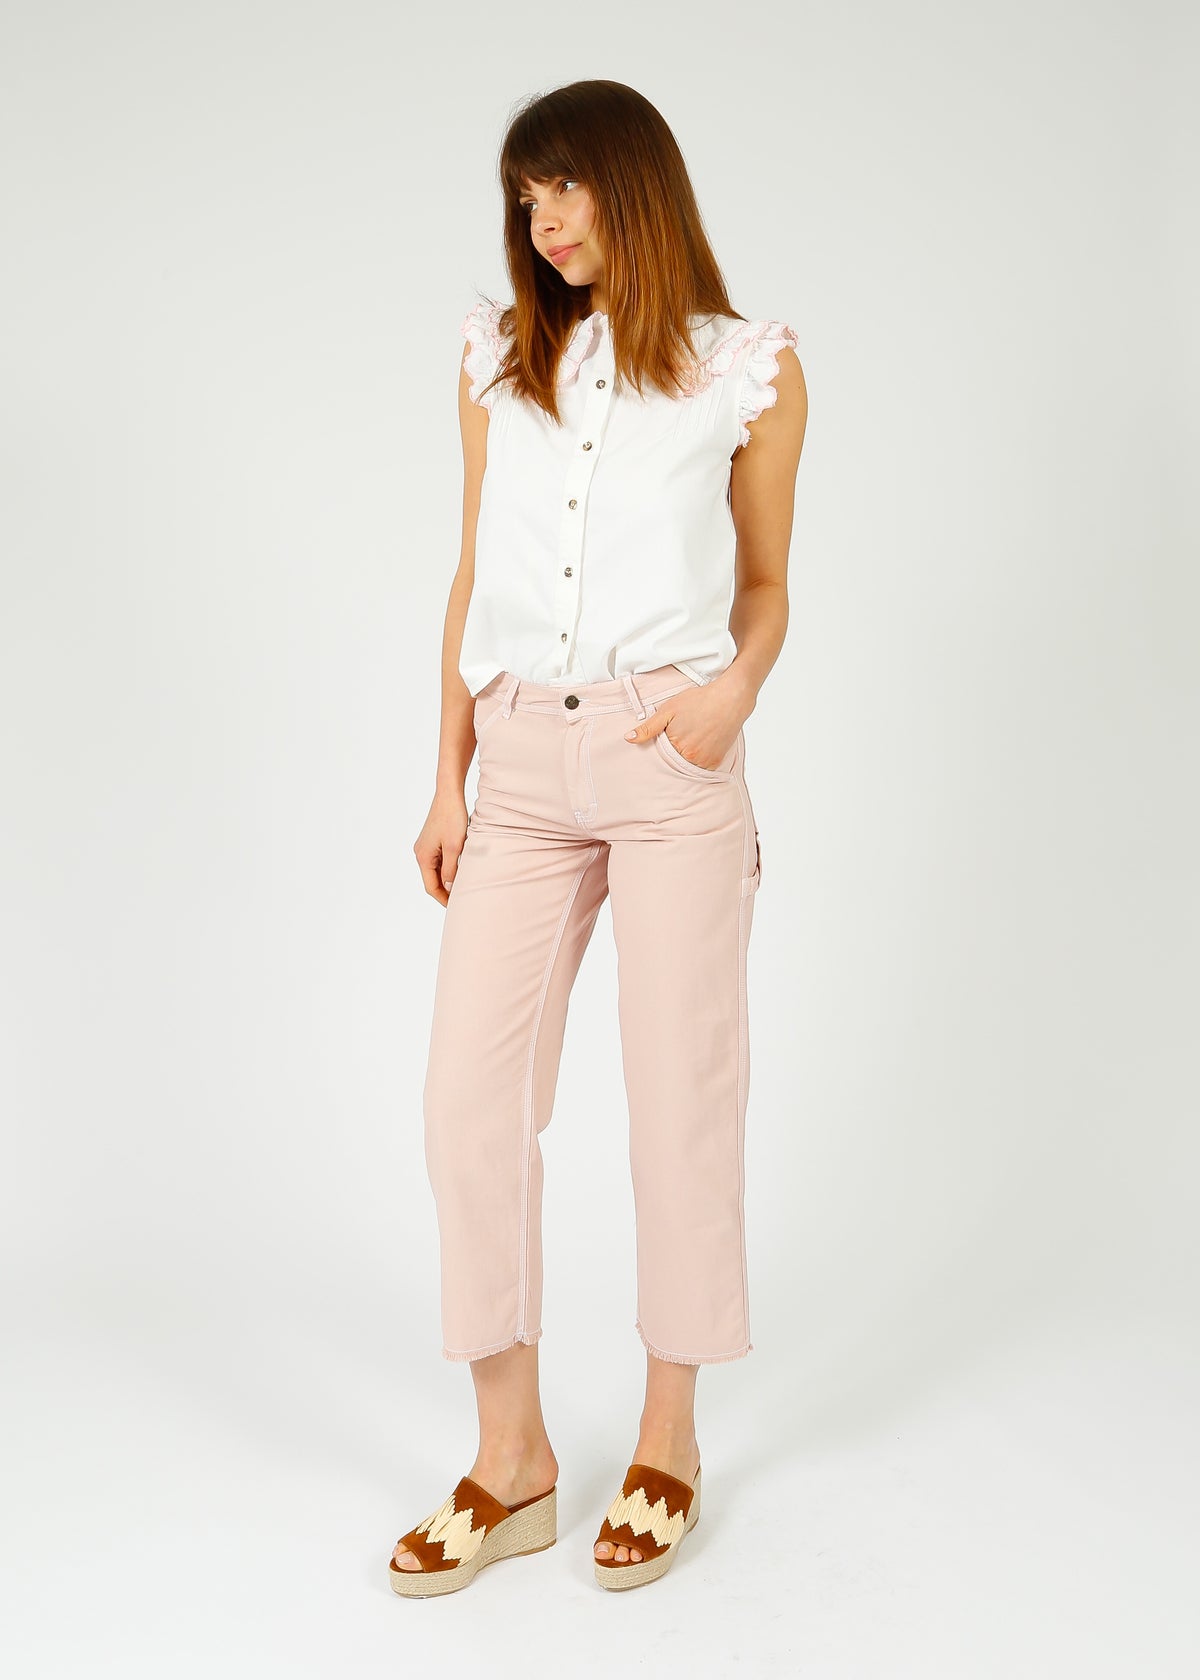 FIVE Penelope Trousers in Old Pink